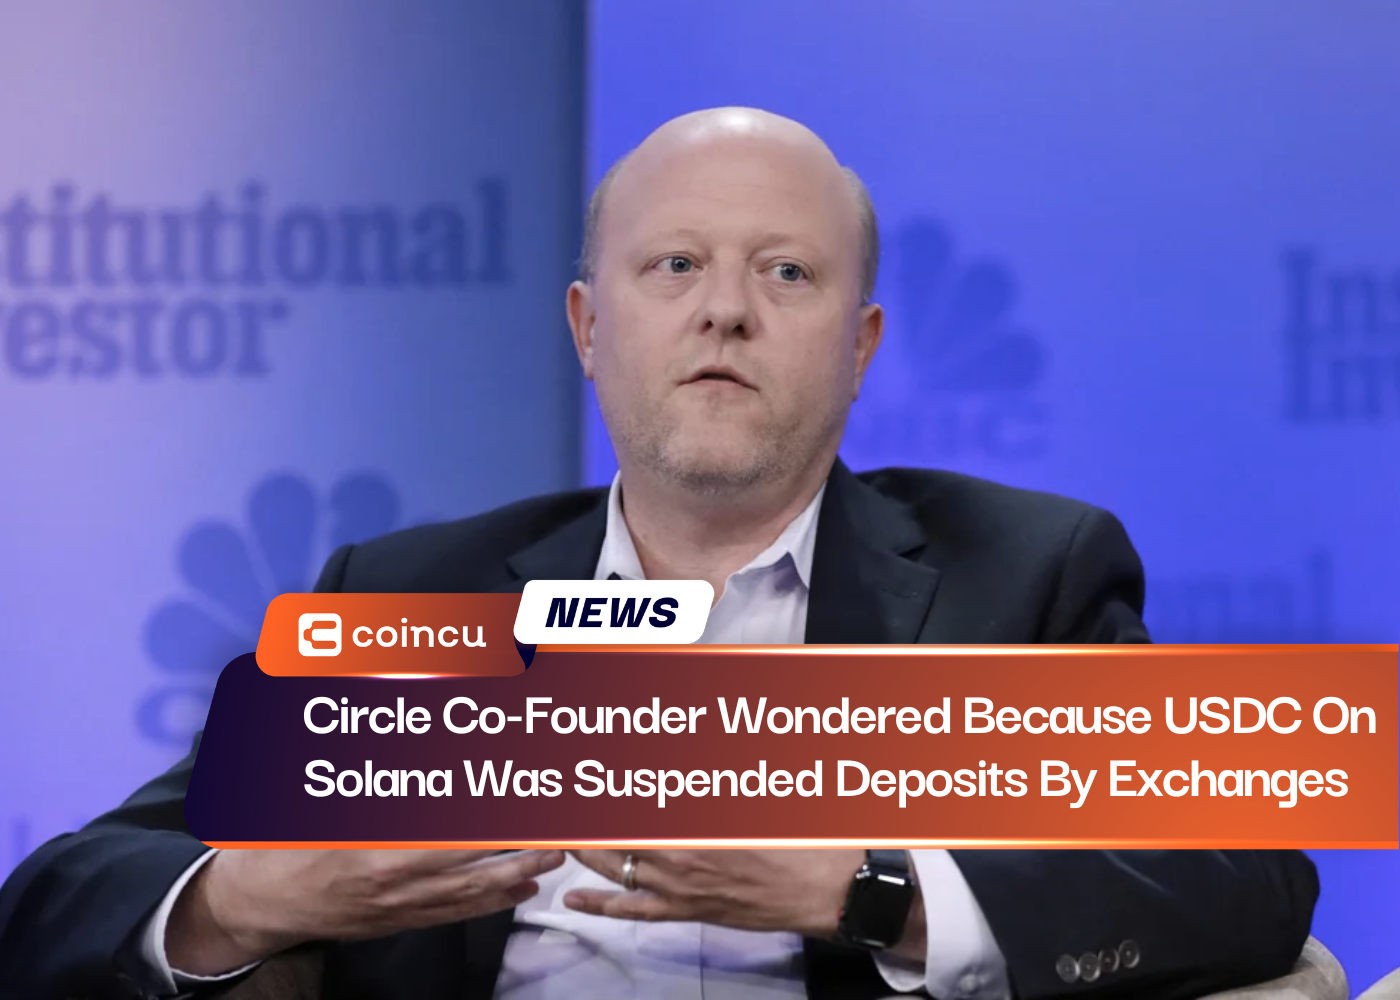 Circle Co-Founder Wondered Because USDC On Solana Was Suspended Deposits By Exchanges